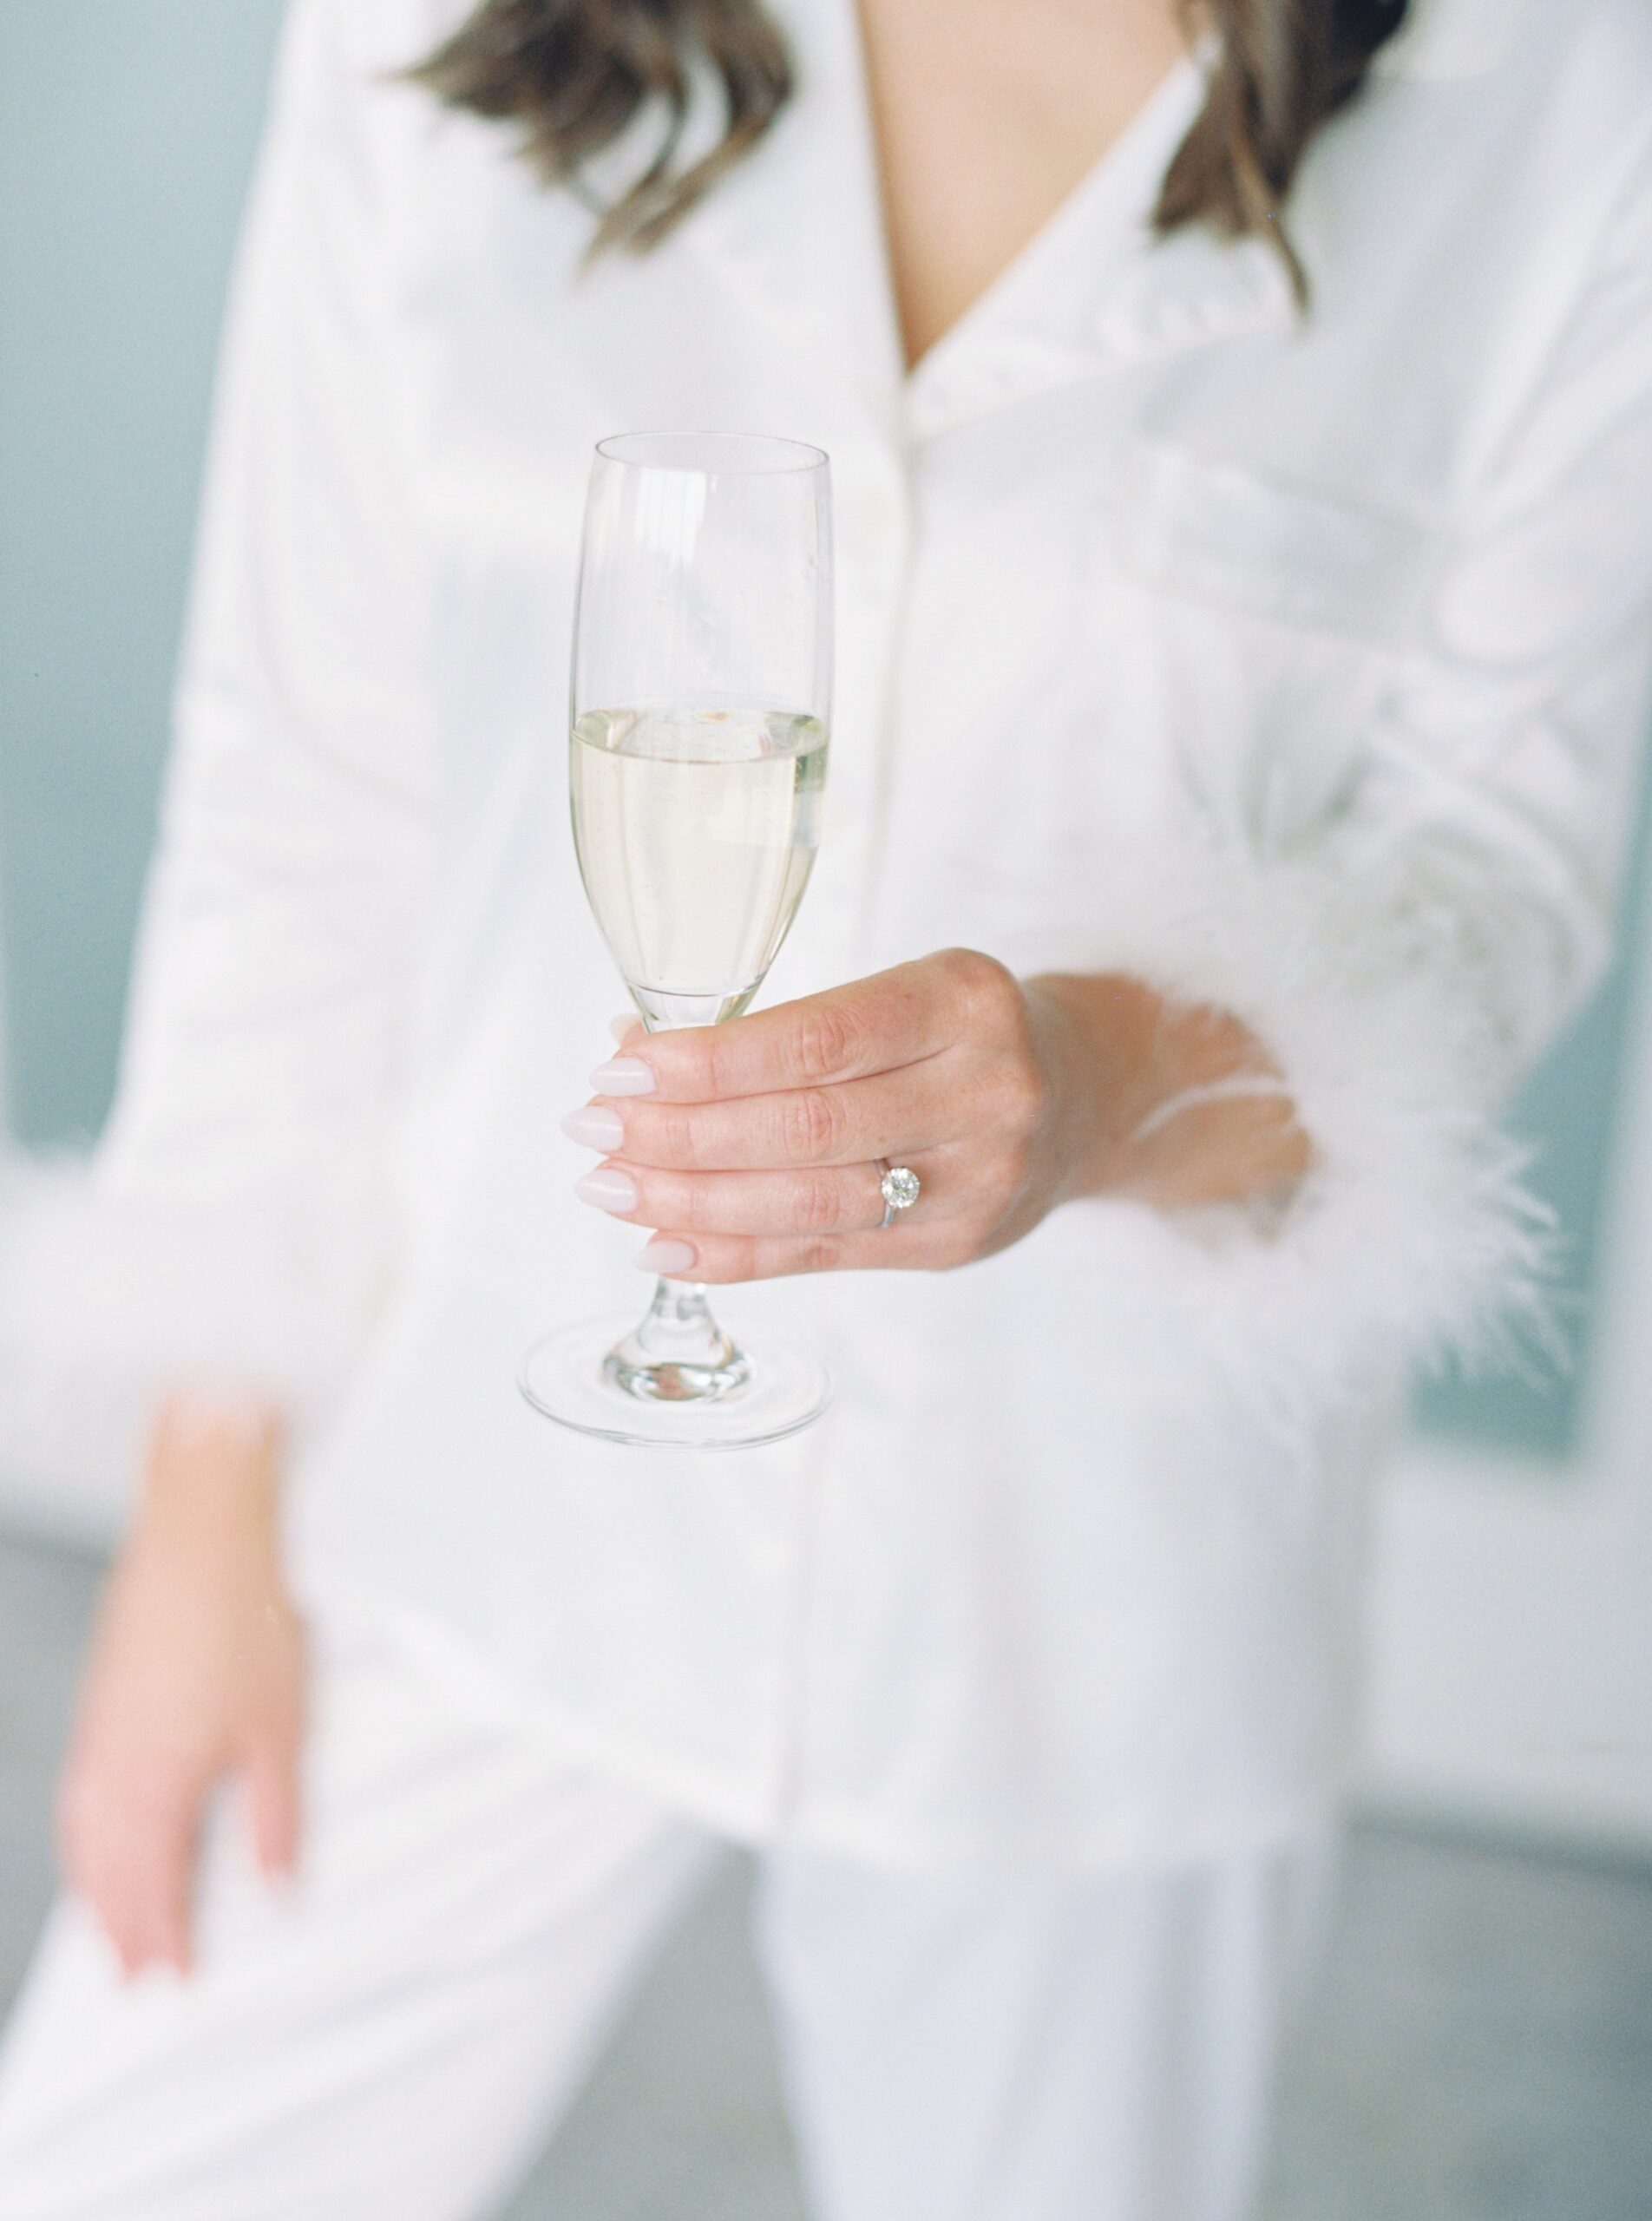 Bride holding champagne flute with her engagement ring hand